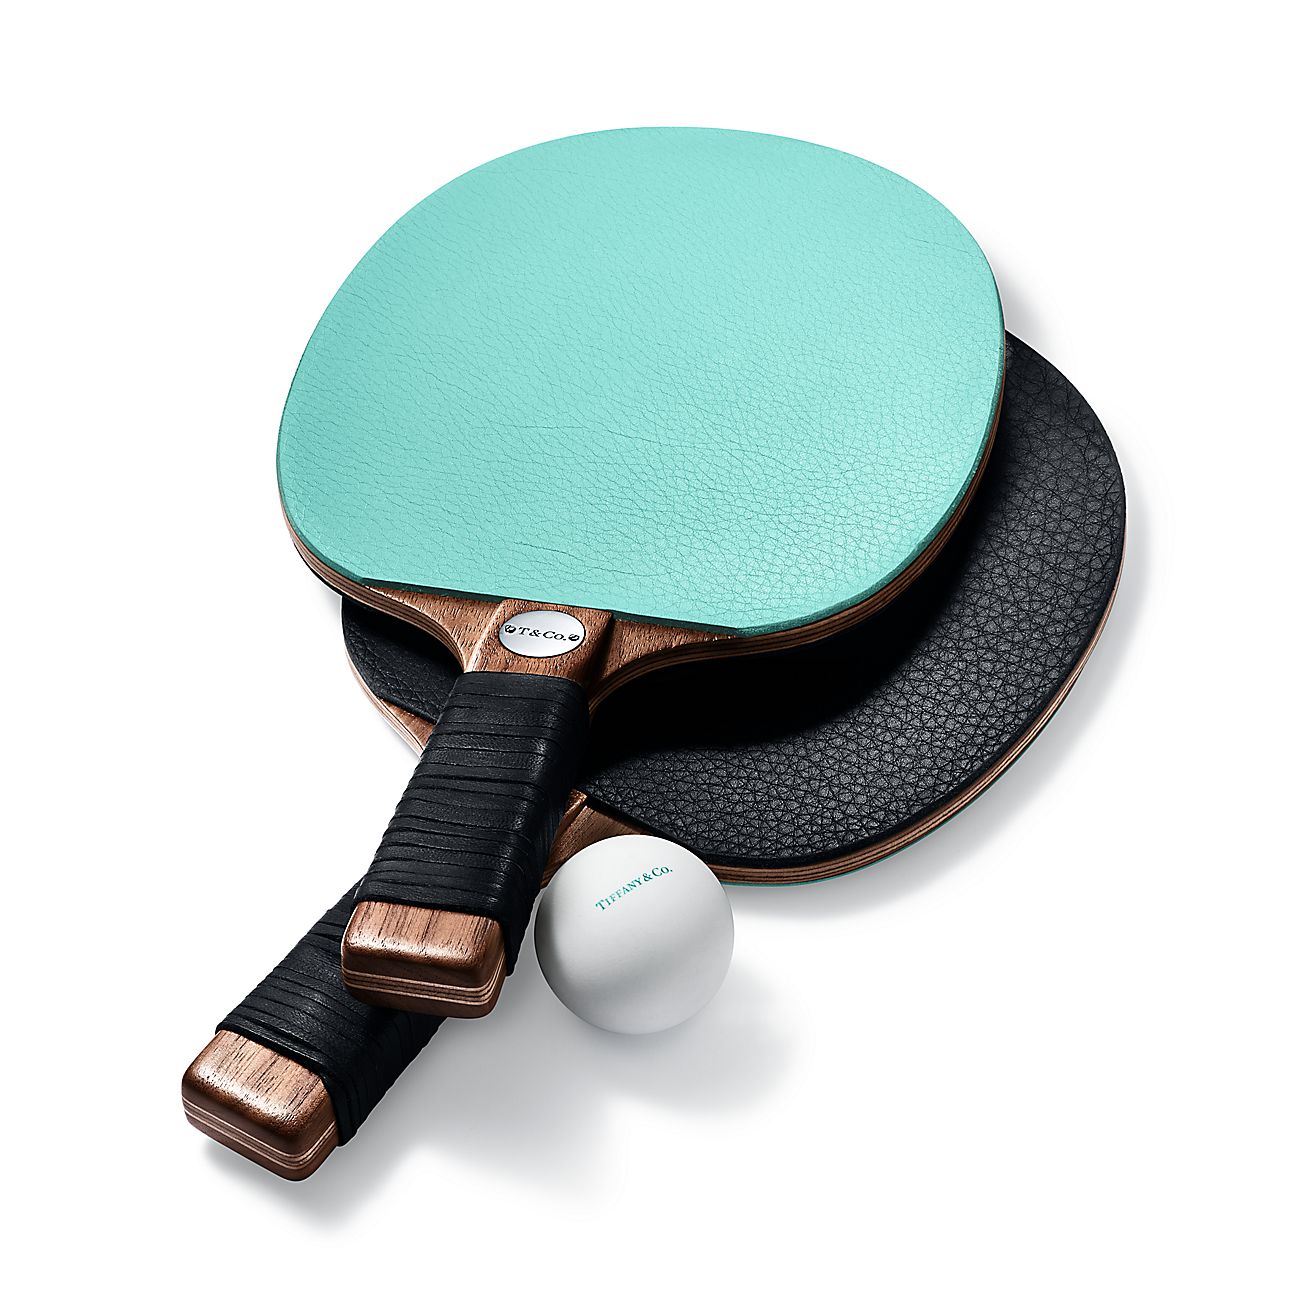 fængsel Sprællemand løfte op Everyday Objects leather and walnut table tennis paddles, set of two. |  Tiffany & Co.